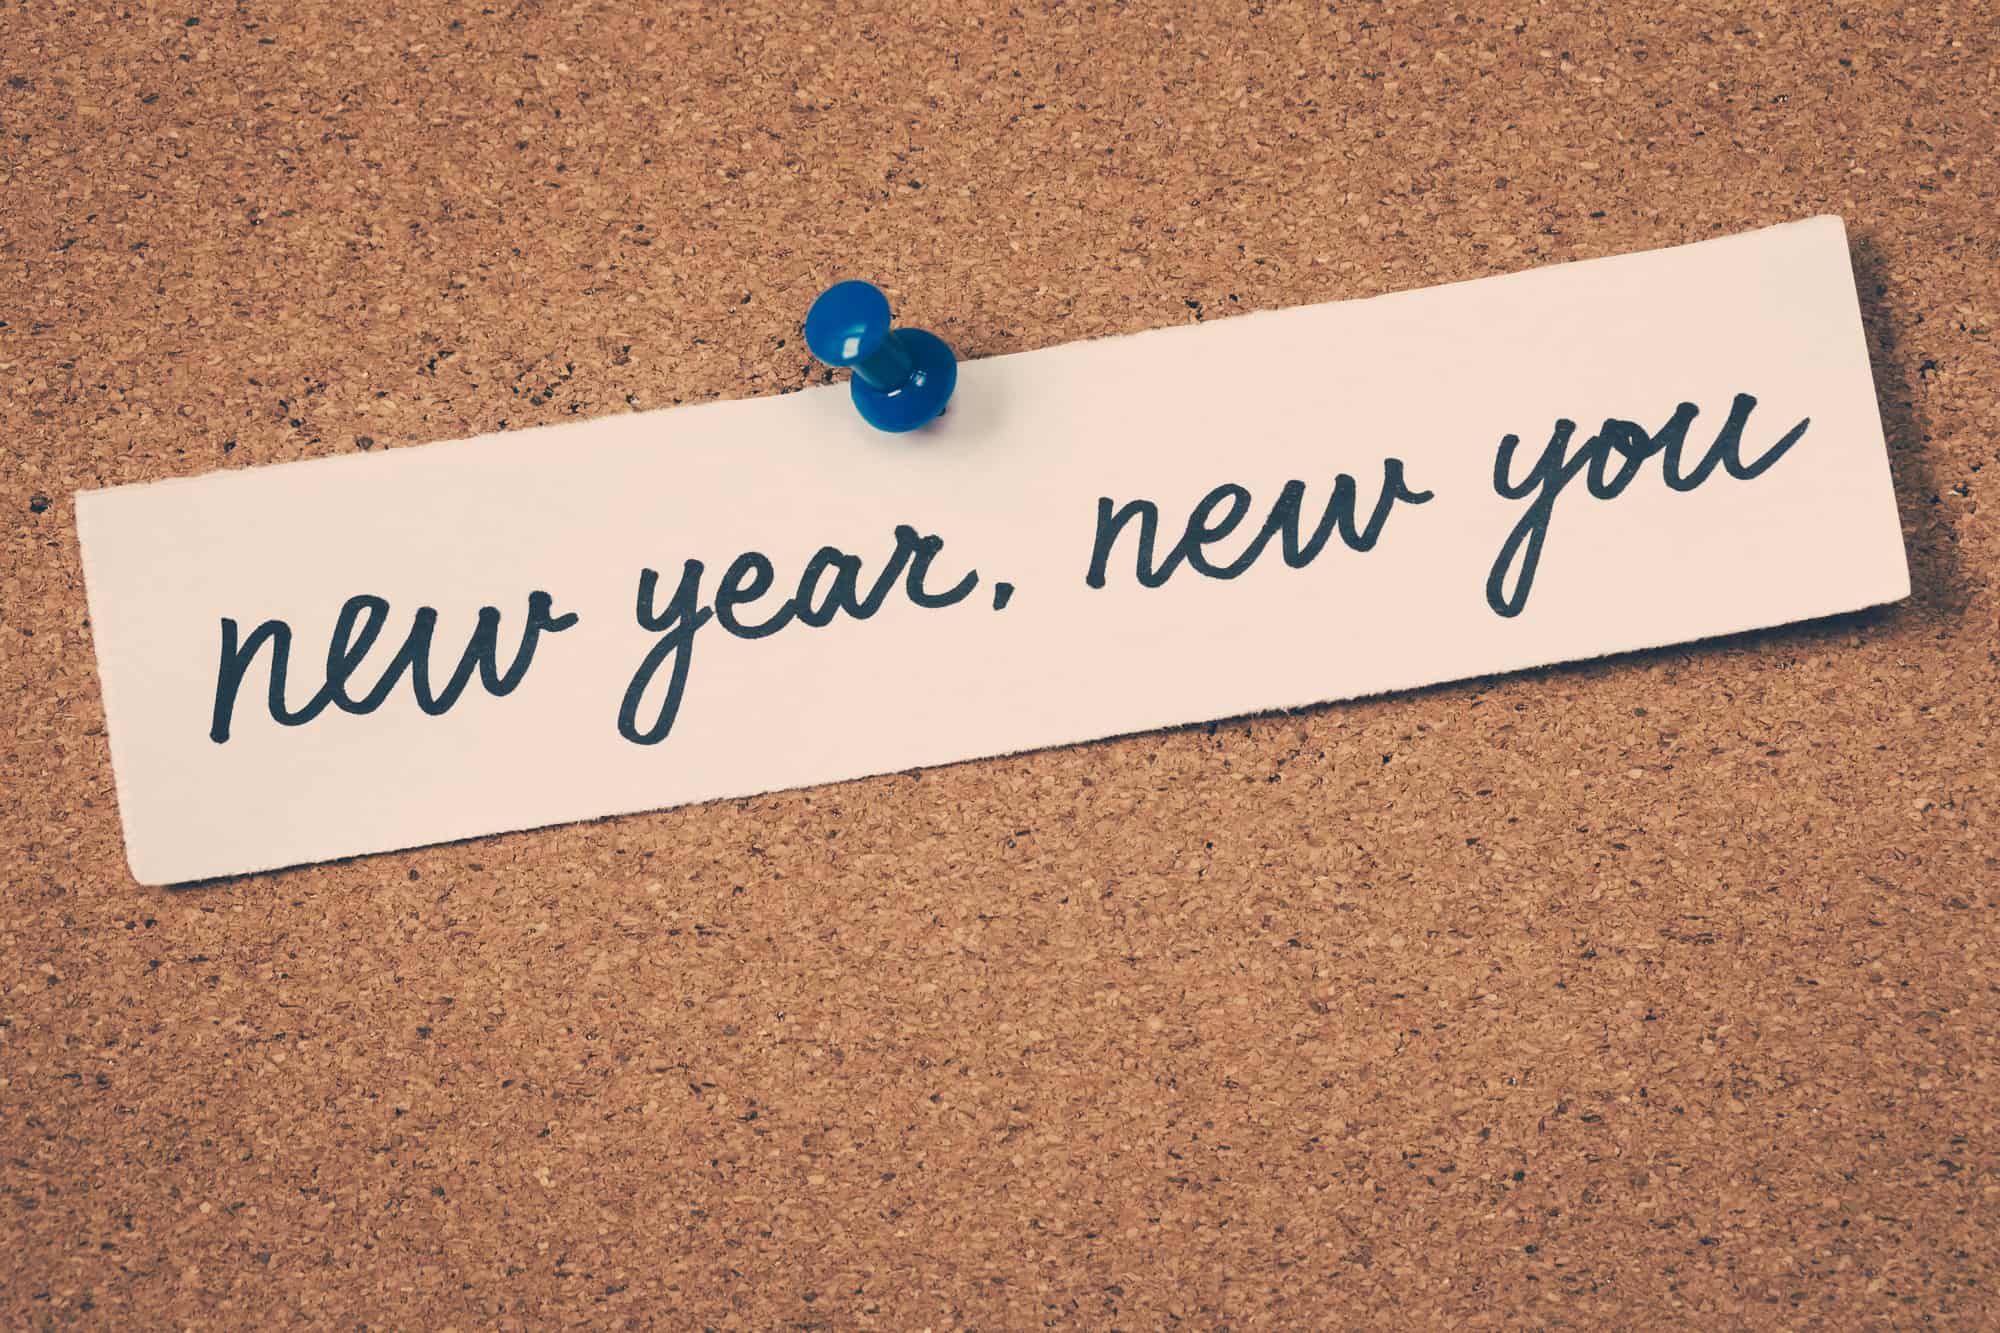 New Year new you sticker serves as a reminder to help kids make their new years resolutions